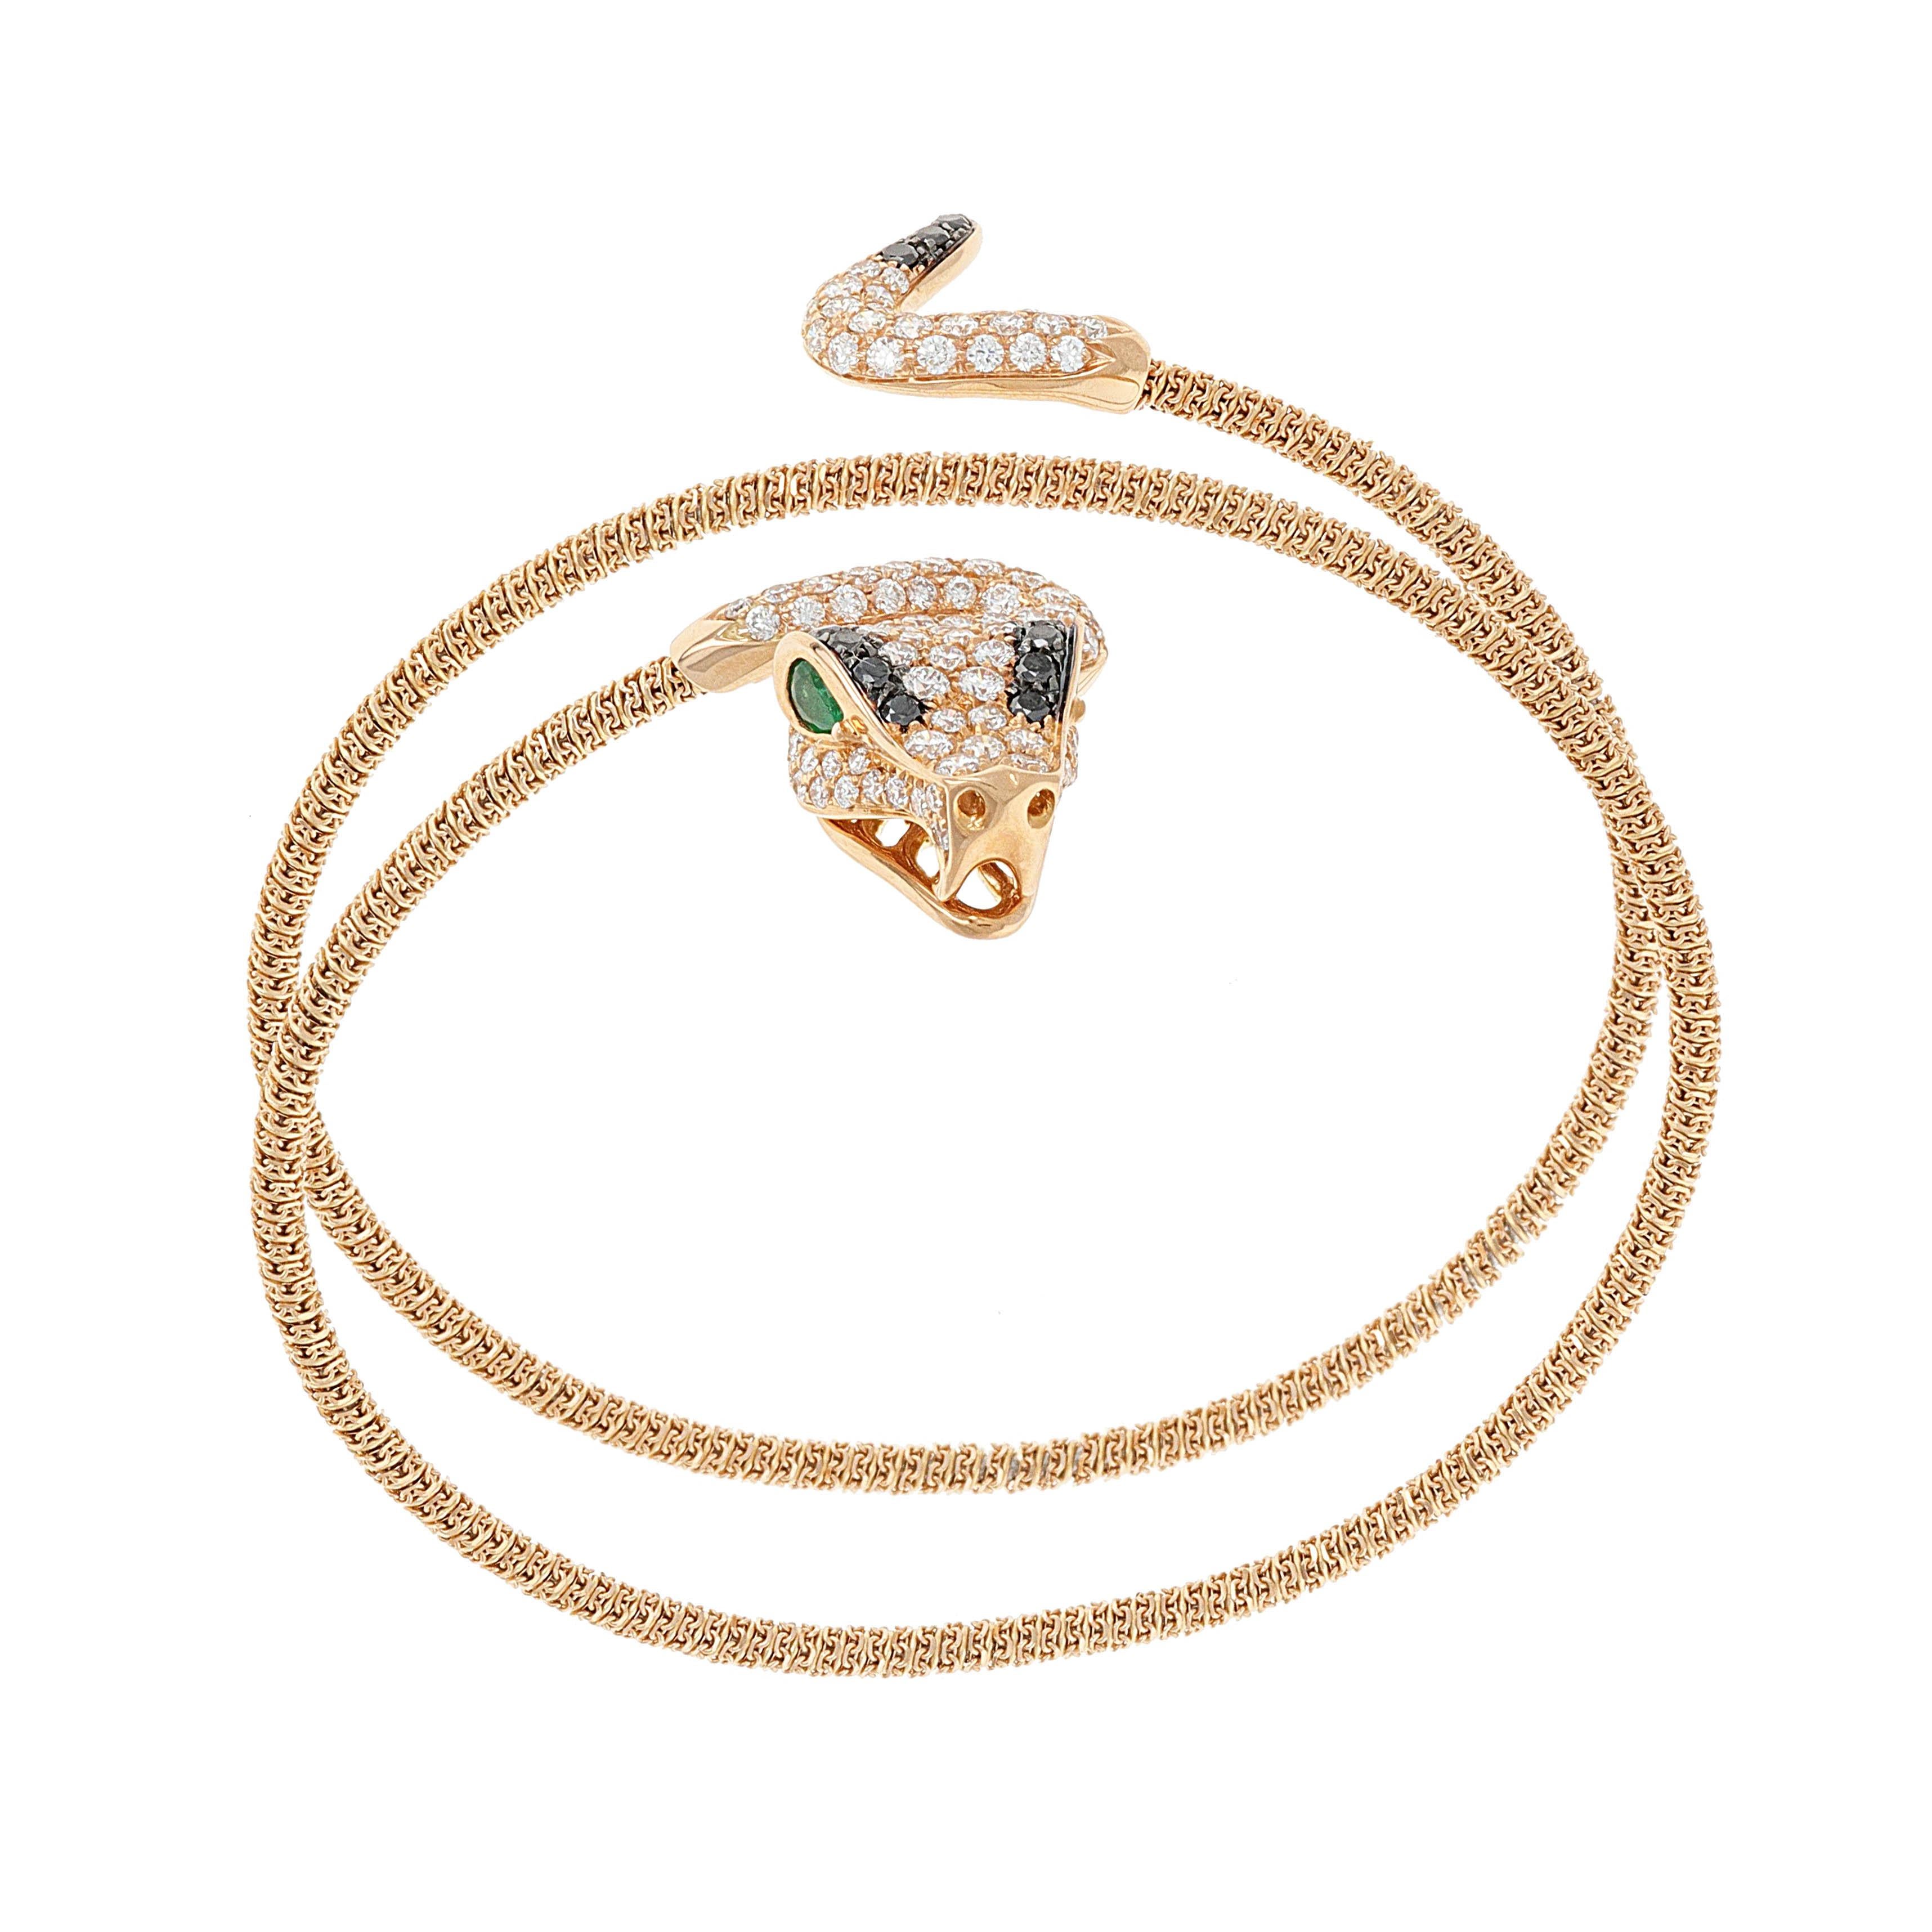 18 karat rose gold and titanium diamond and emerald snake cuff bangle. This bracelet is flexible and made so you can wrap it around your wrist and/or arm. The snakes head and tail is adorned in diamonds and emeralds. There are a total weight of 2.23